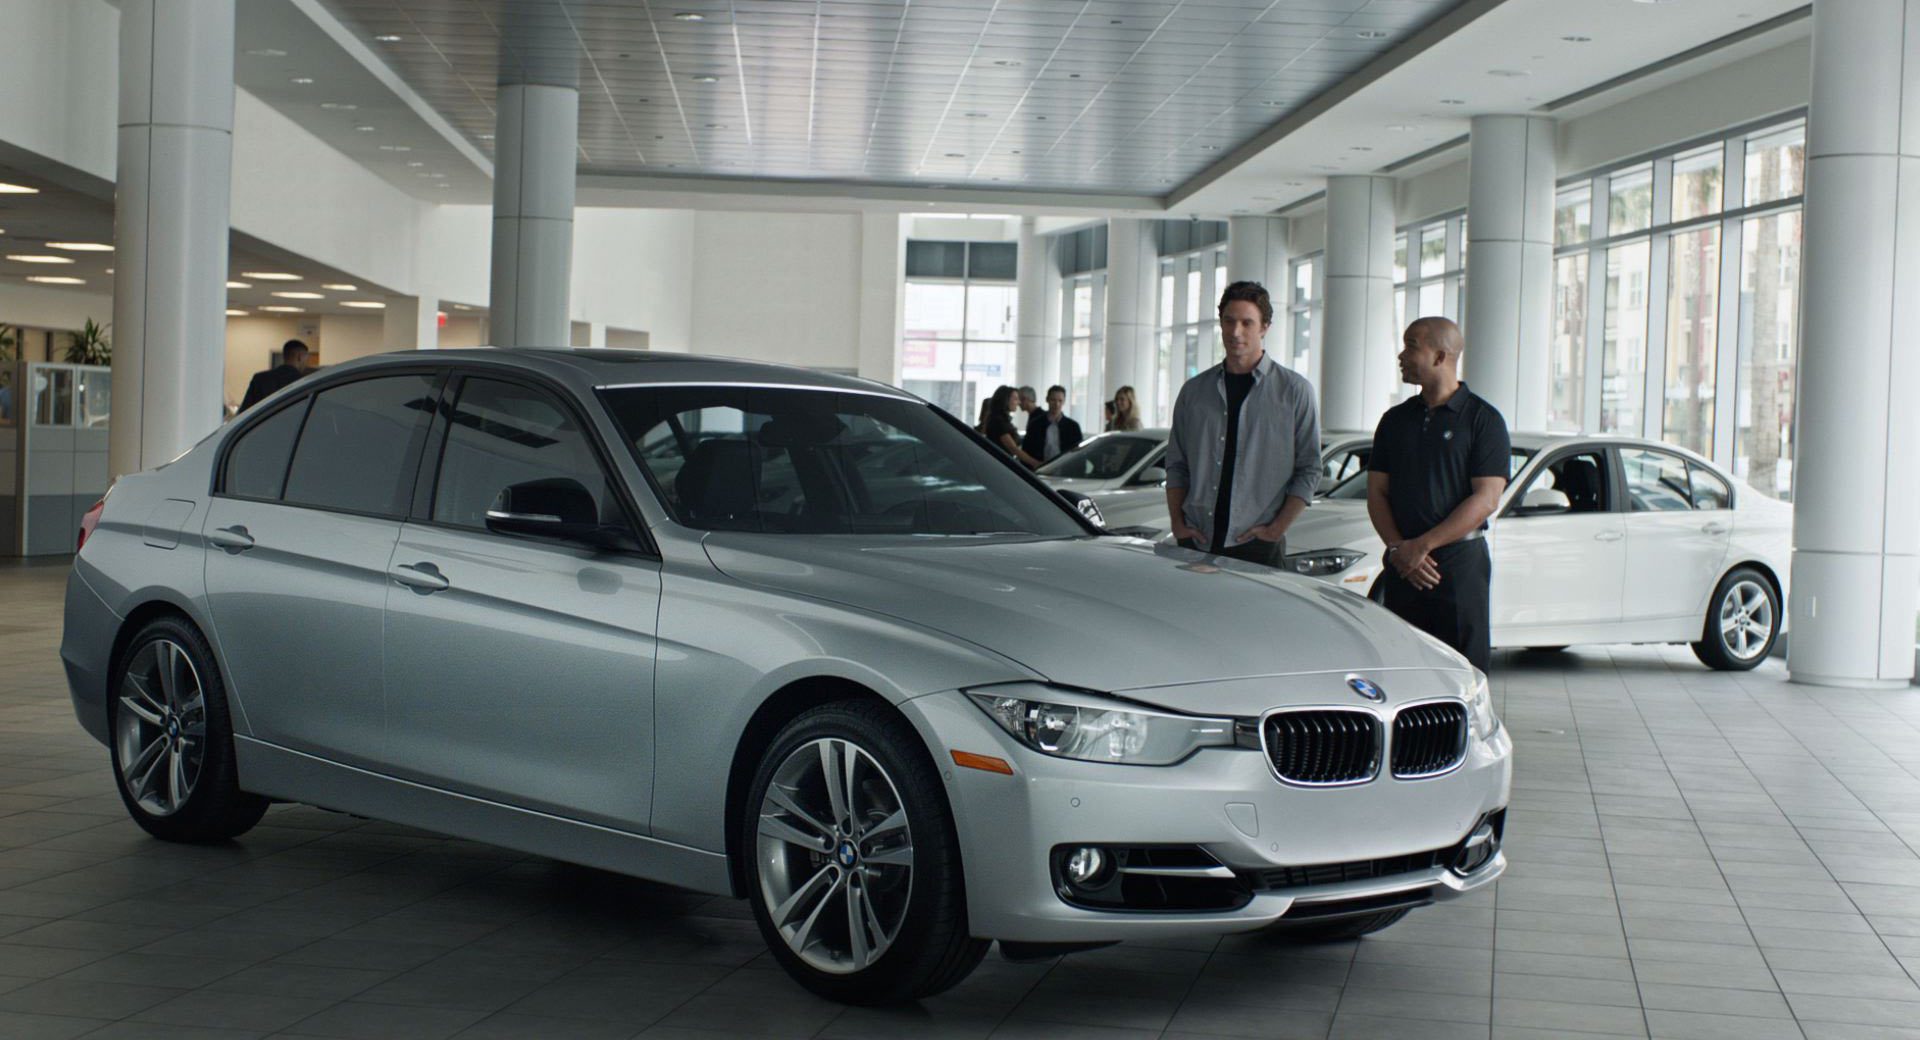 BMW Under SEC Investigation For Possibly Inflating Their Sales Figures